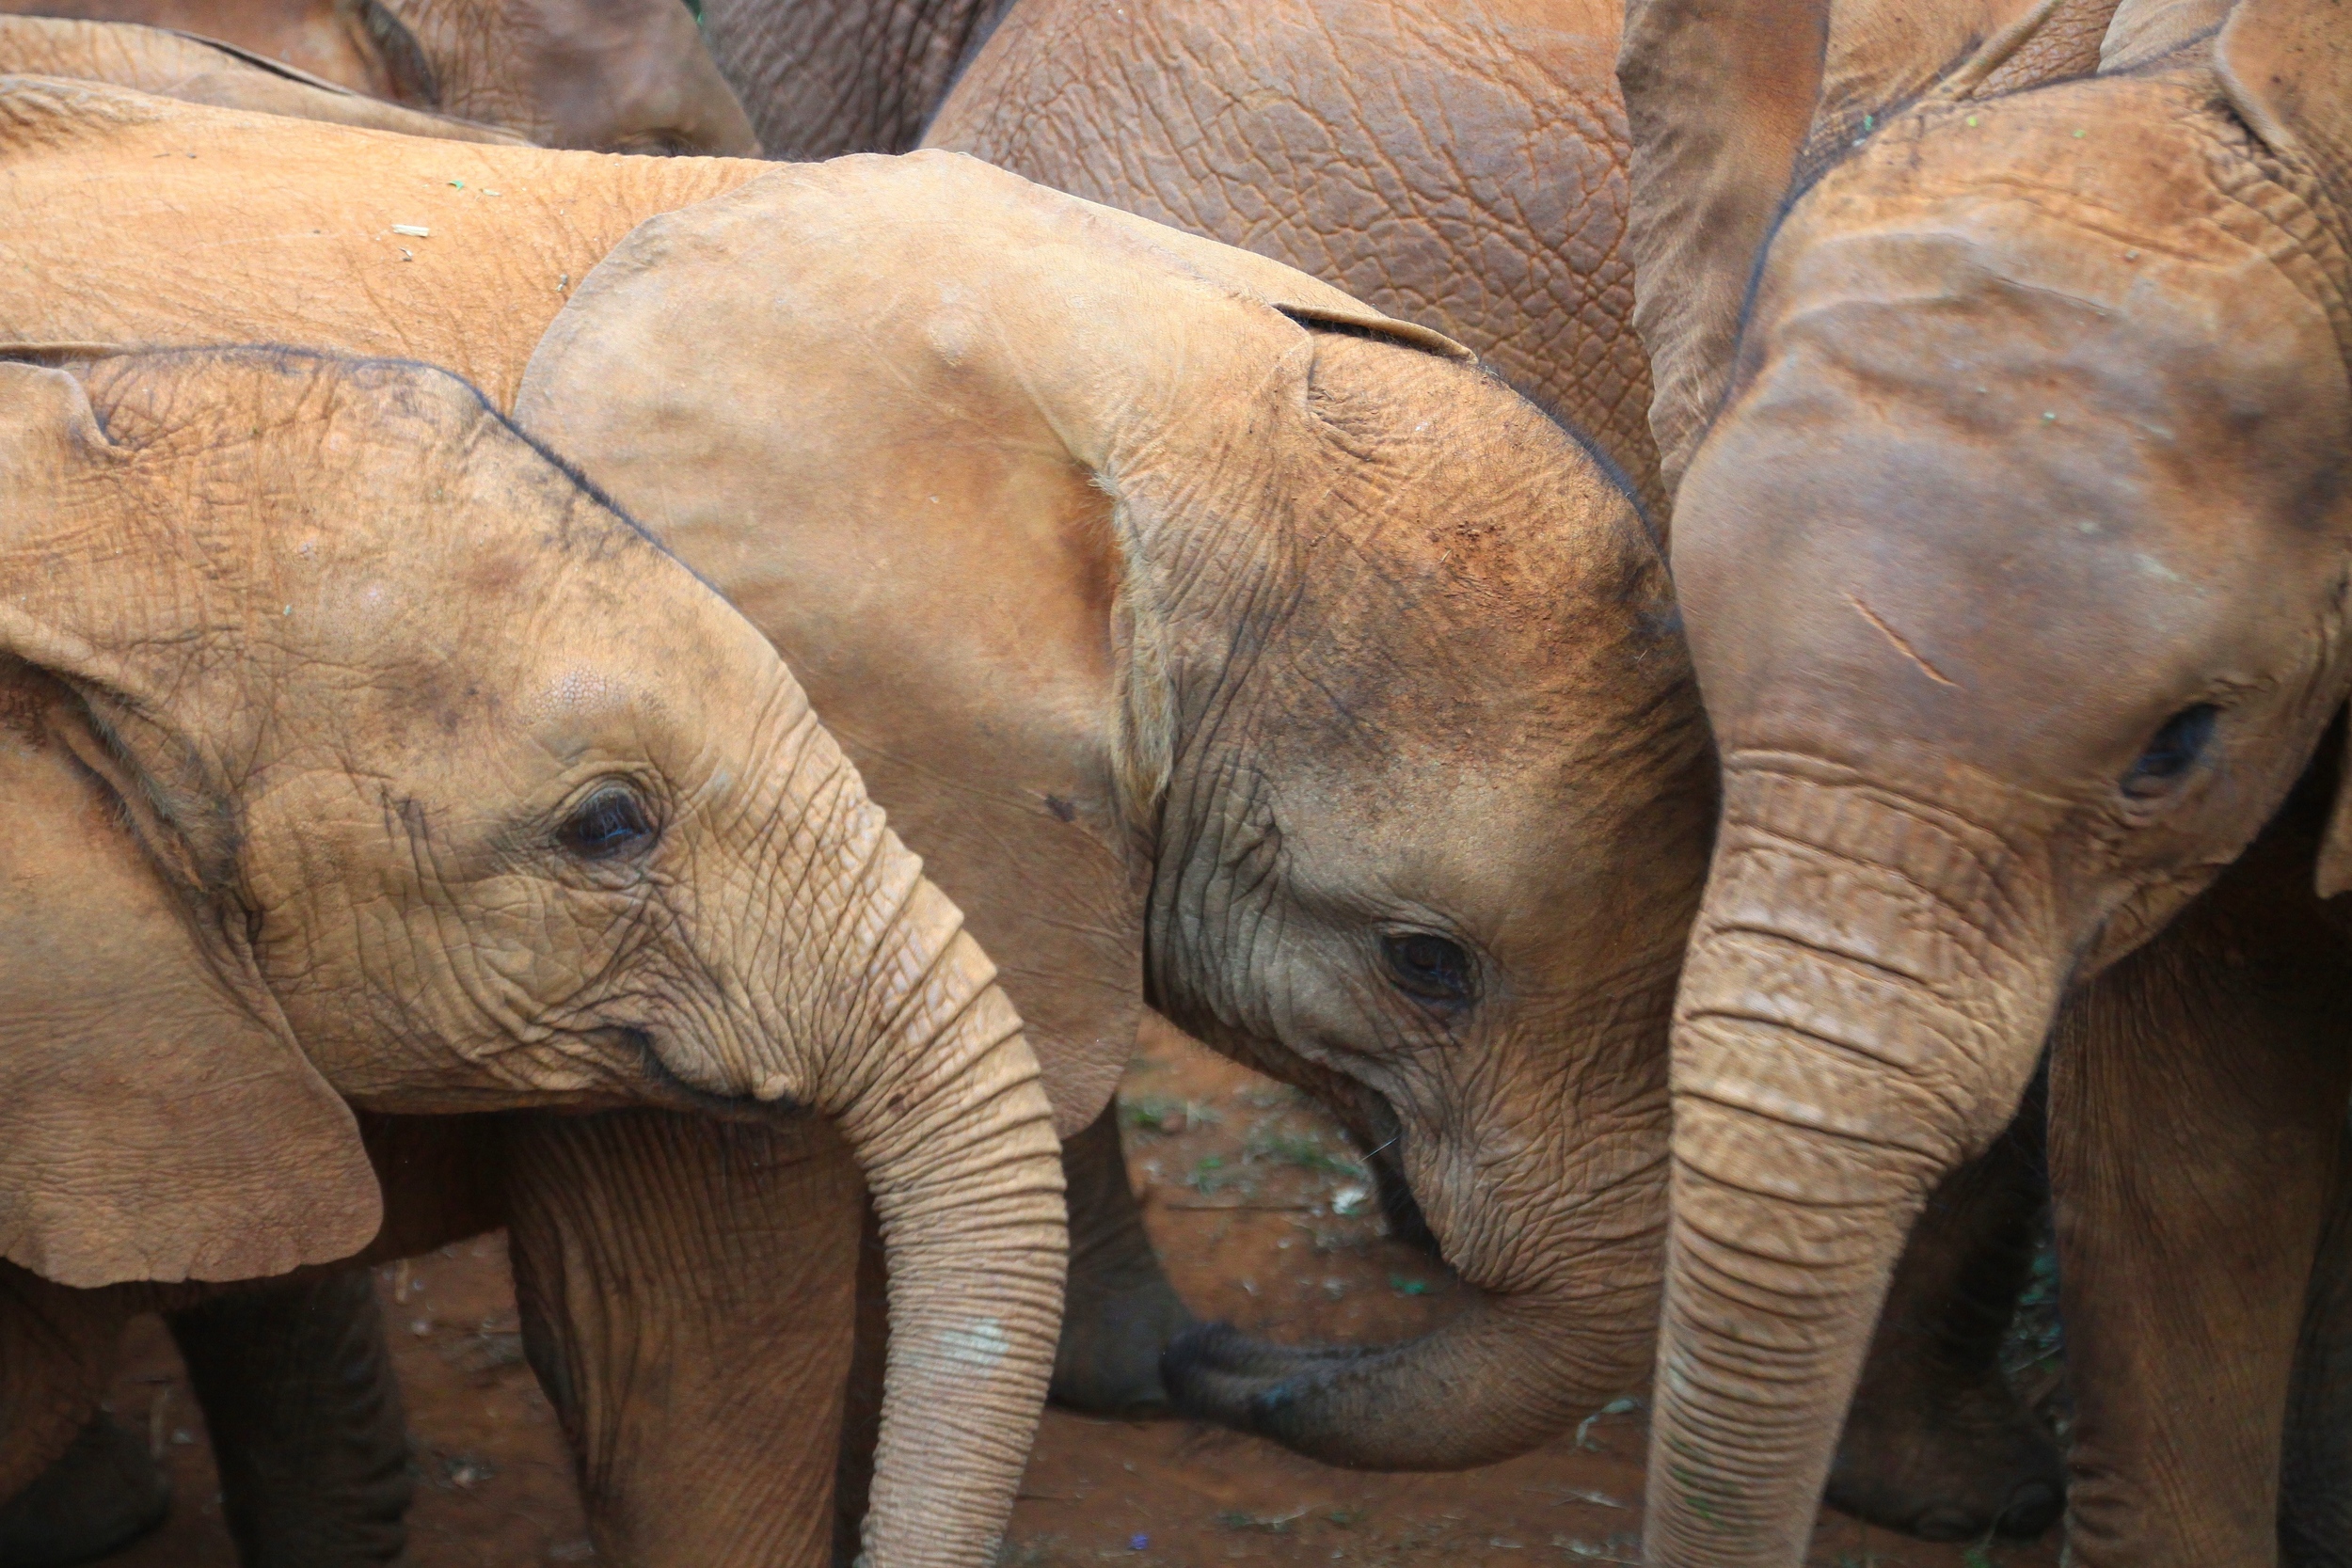 The parents of these orphaned elephants were killed by poachers. They're now being looked after at the David Sheldrick Wildlife Trust in Nairobi